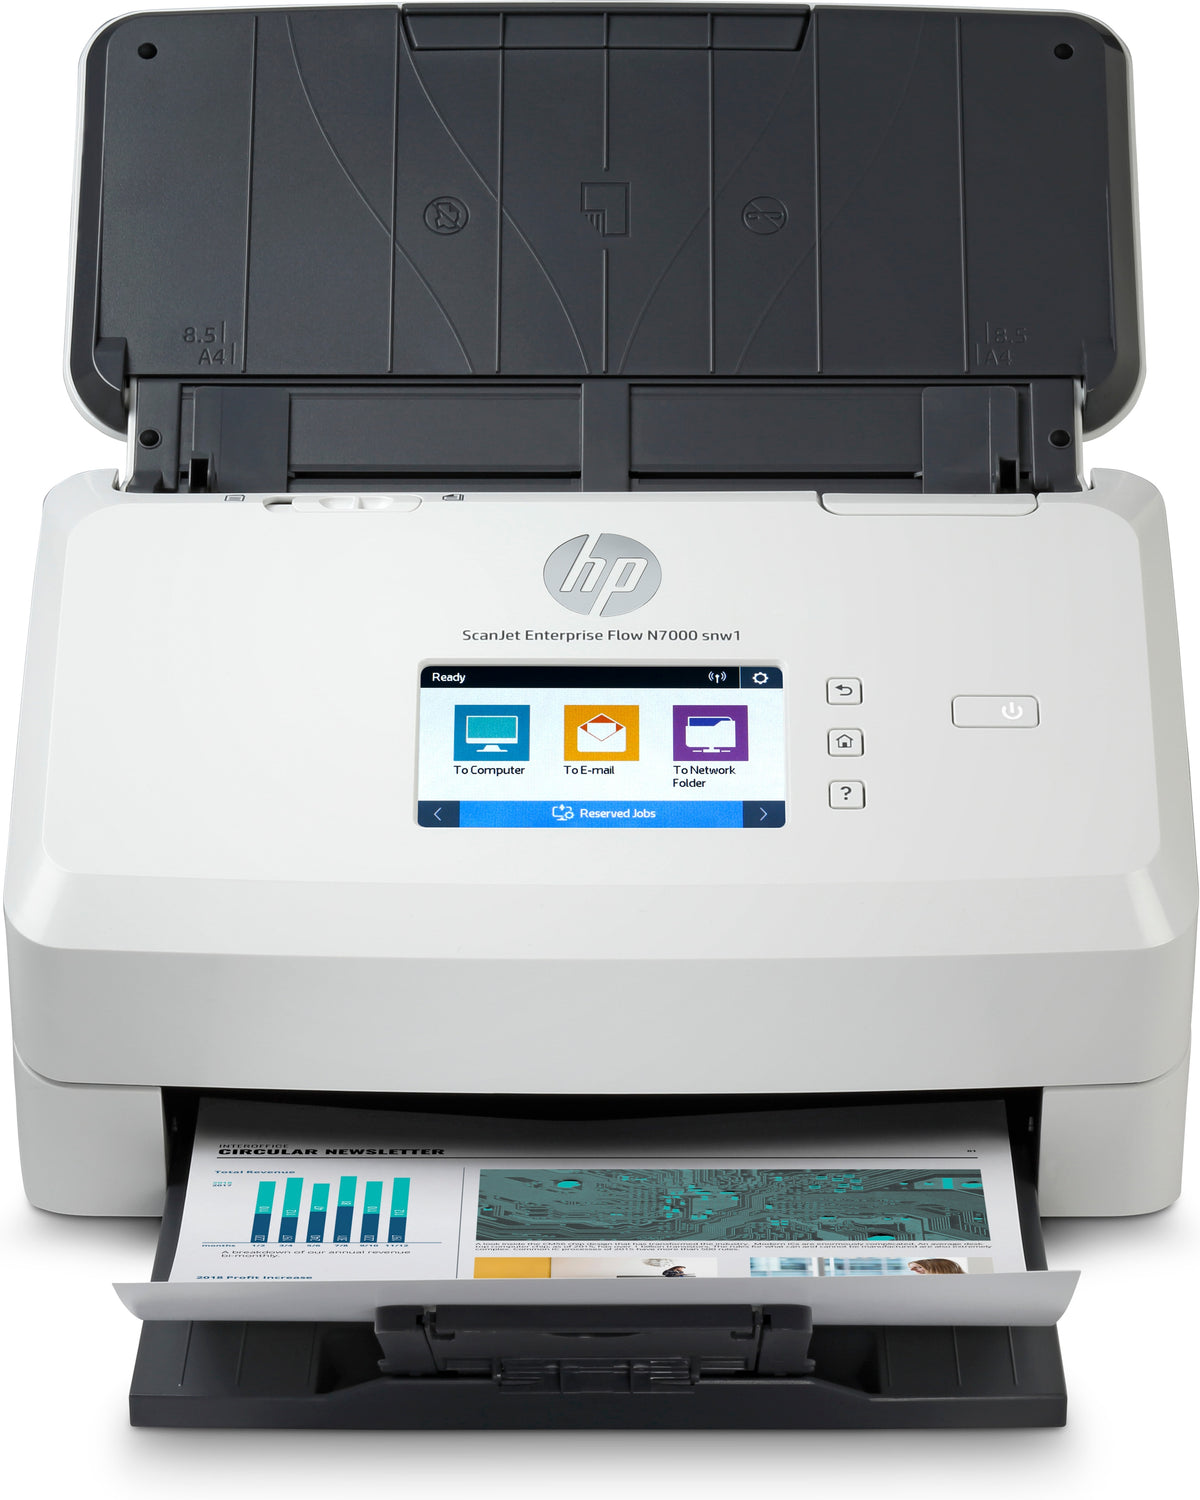 HP ScanJet Enterprise Flow N7000 snw1 - Document Scanner - CMOS/CIS - Duplex - 216 x 3100 mm - 600 dpi x 600 dpi - up to 75 ppm (mono) / up to 75 ppm (color) - ADF (80 sheets) - up to 7500 scans per day - USB 3.0, LAN, Wi-Fi(n)